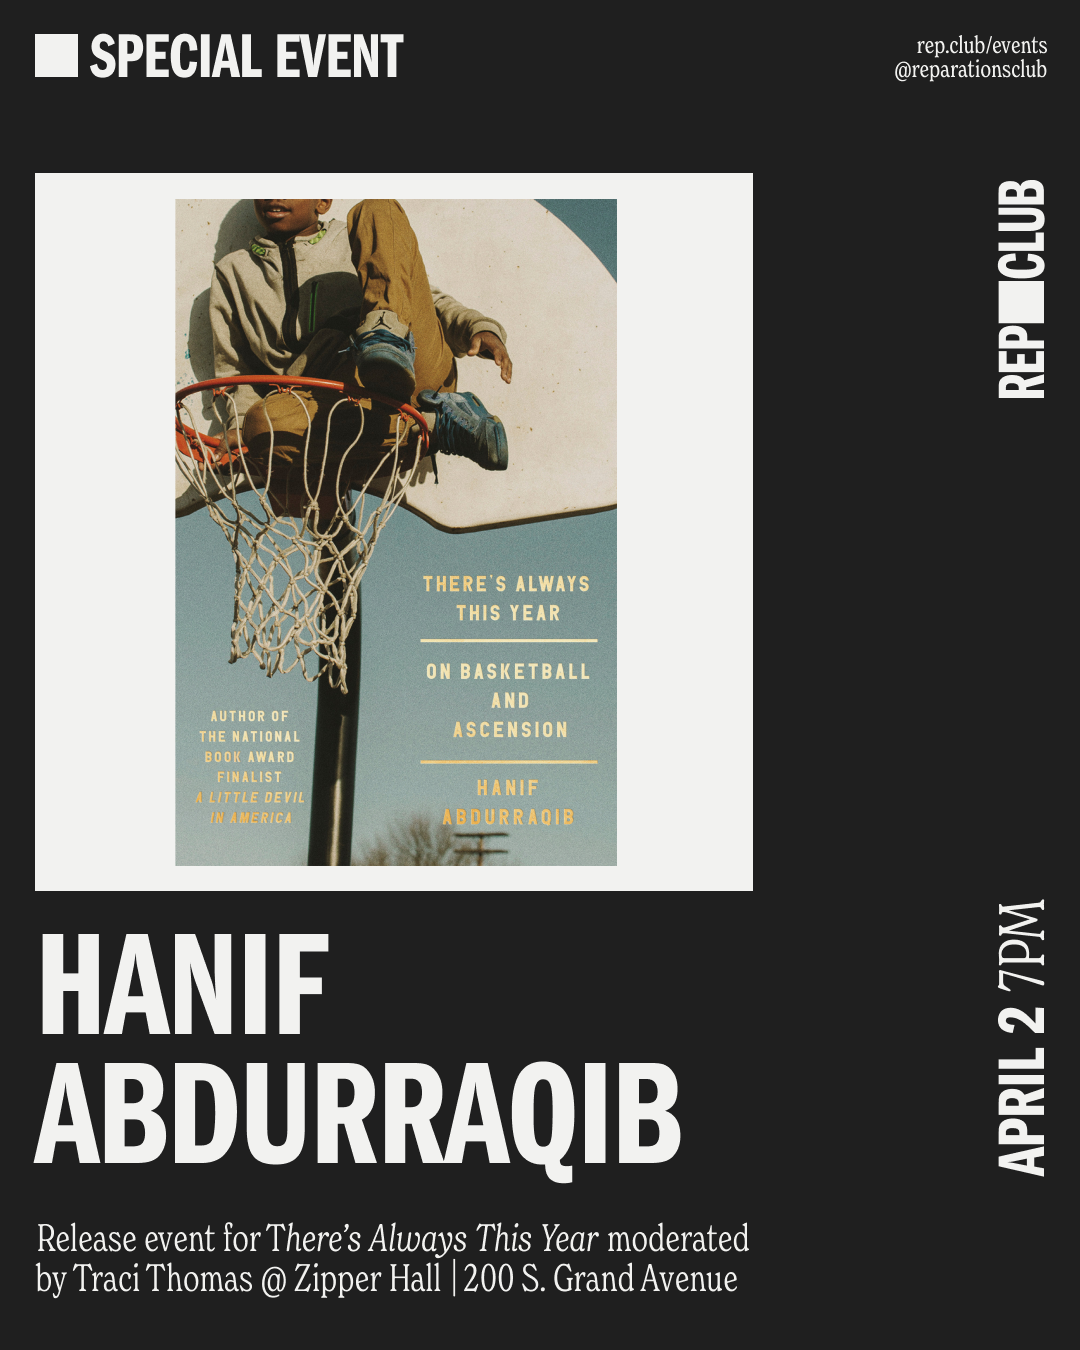 Apr 2nd EVENT: There's Always This Year // Hanif Abdurraqib & Traci Thomas